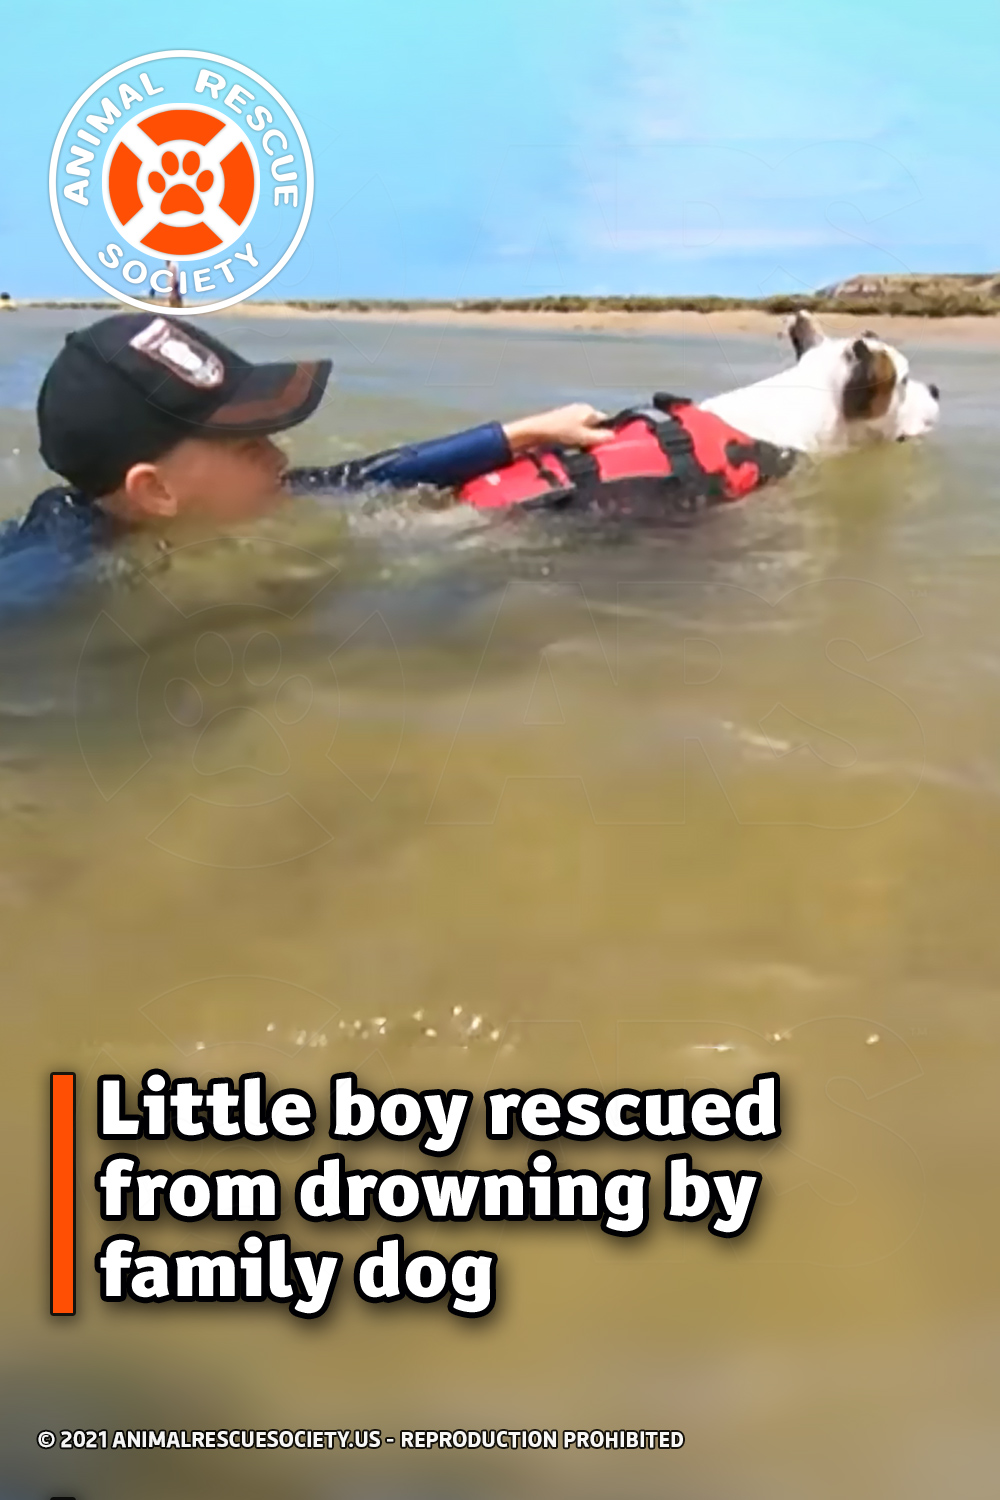 Little boy rescued from drowning by family dog